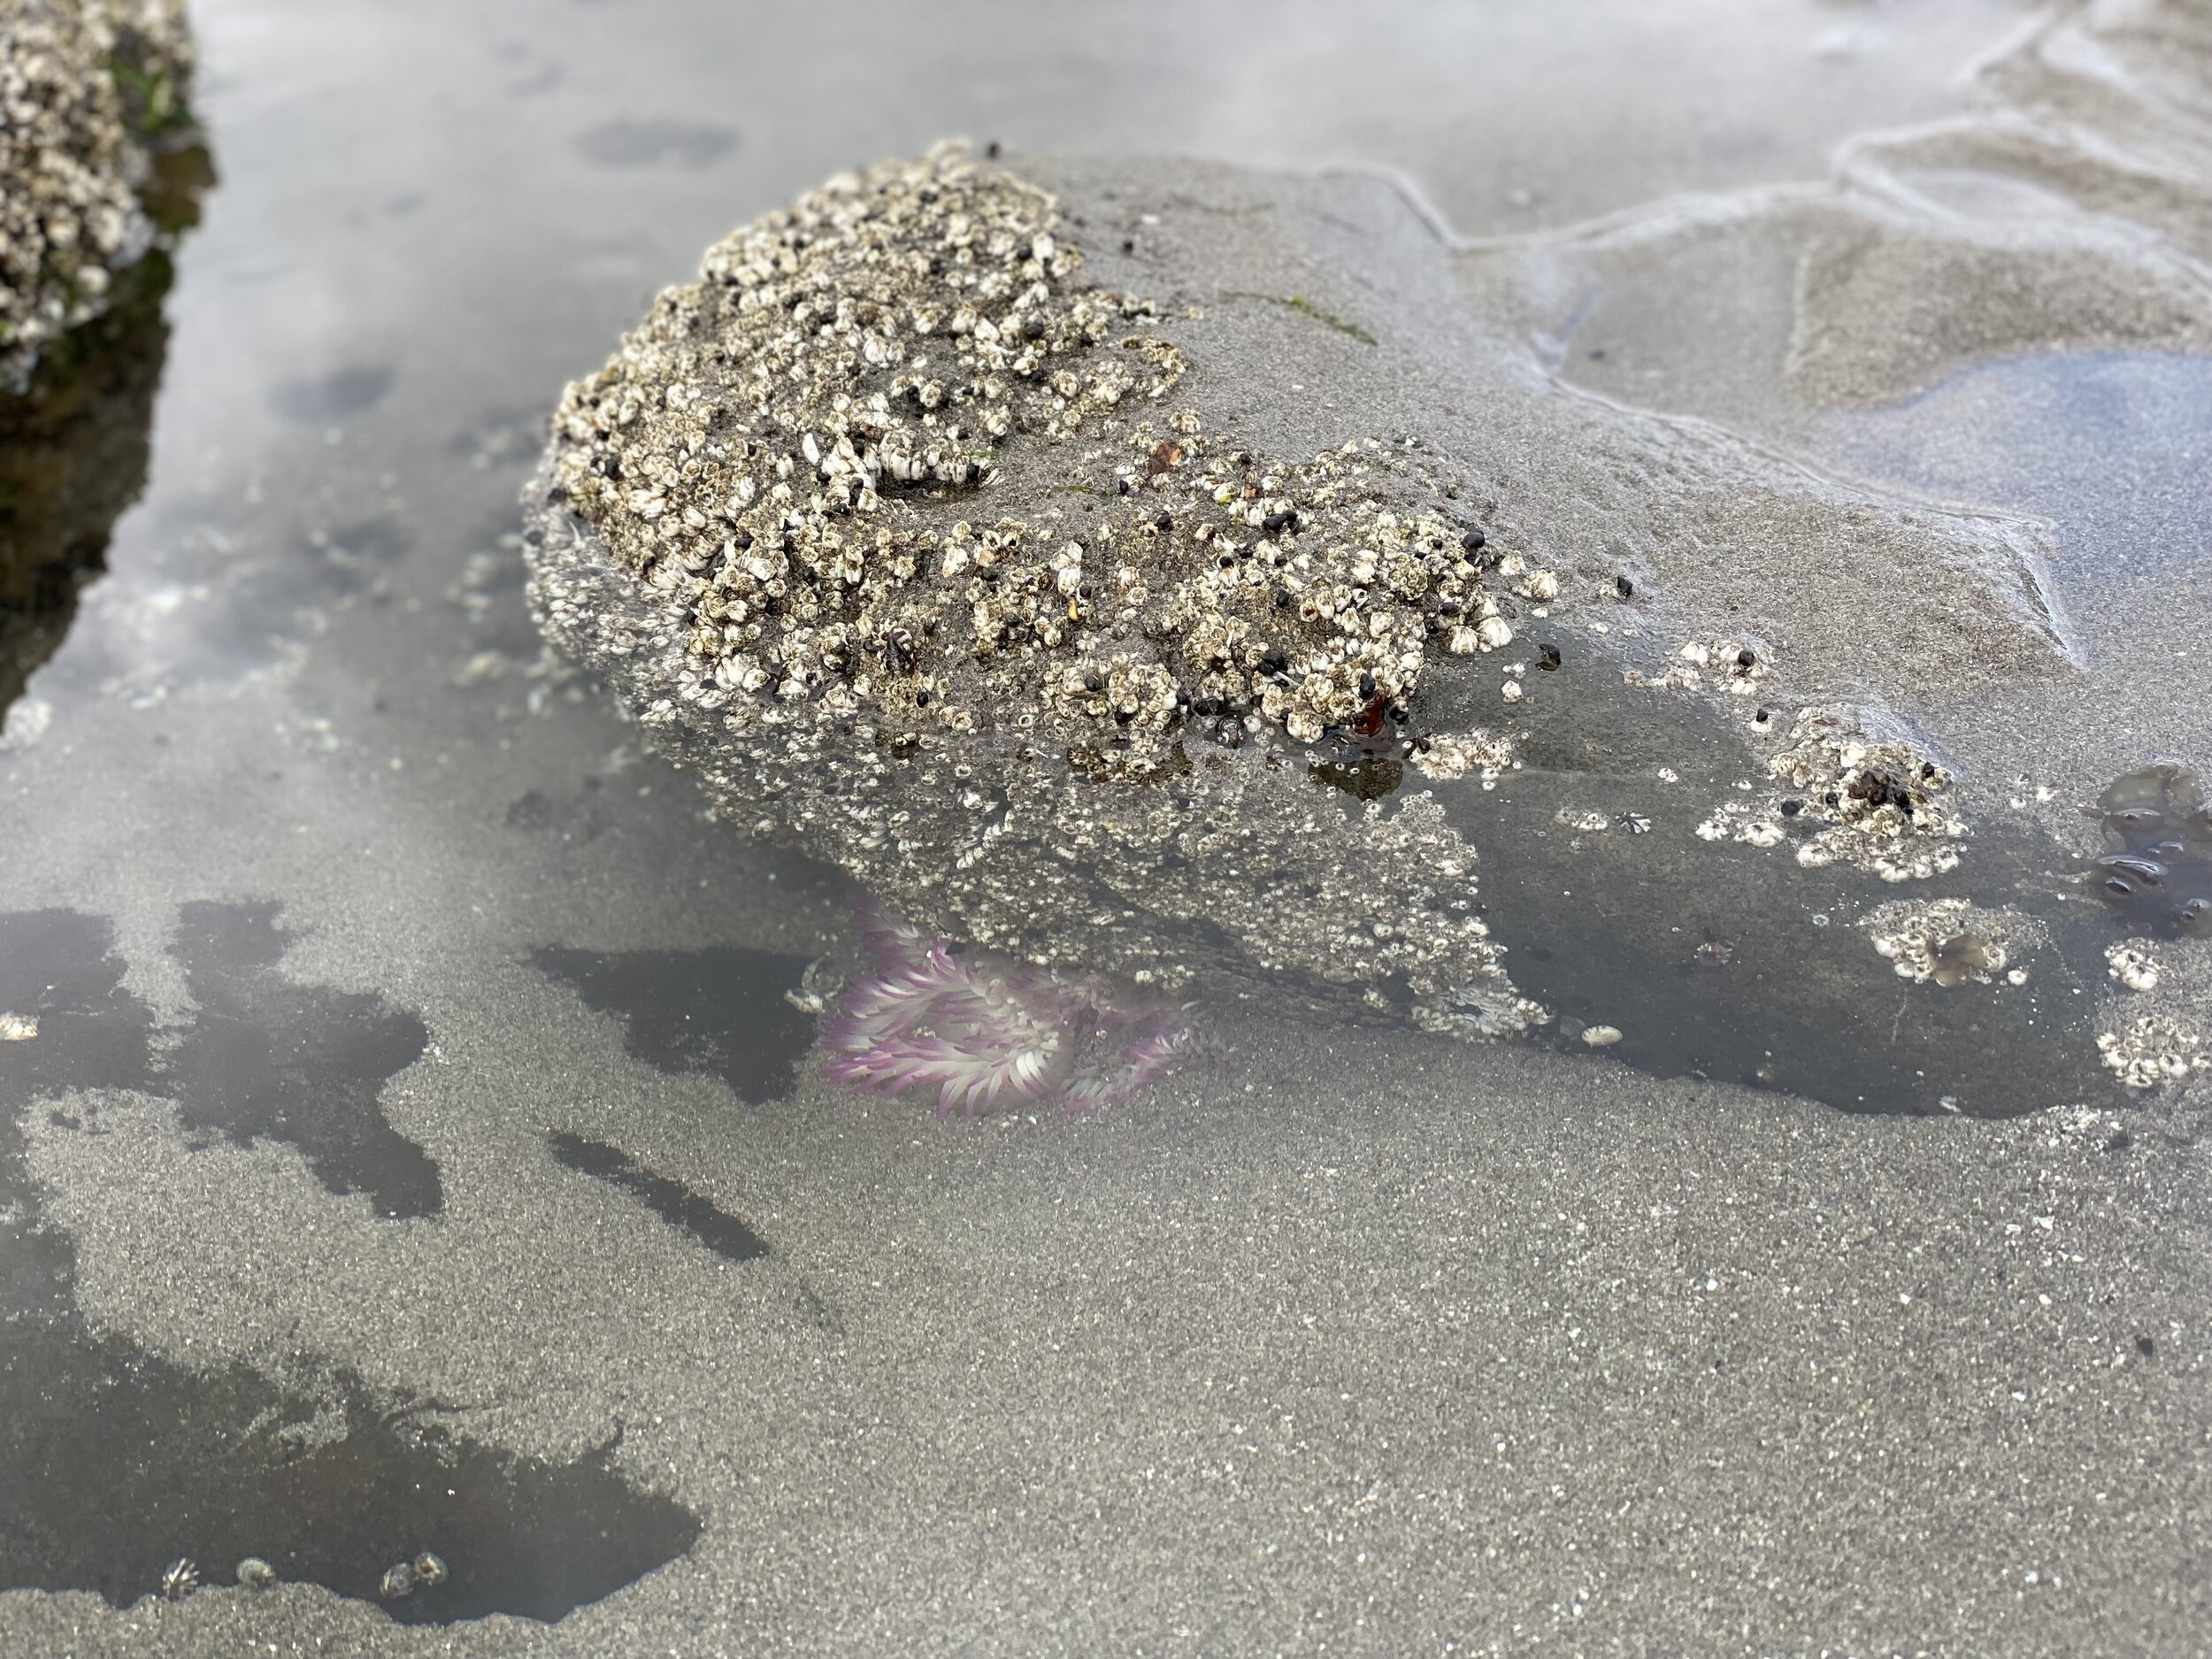 Pink sea anemone hid under a barnacle-covered rock.  Photo by Karen Boudreaux, June 15, 2021